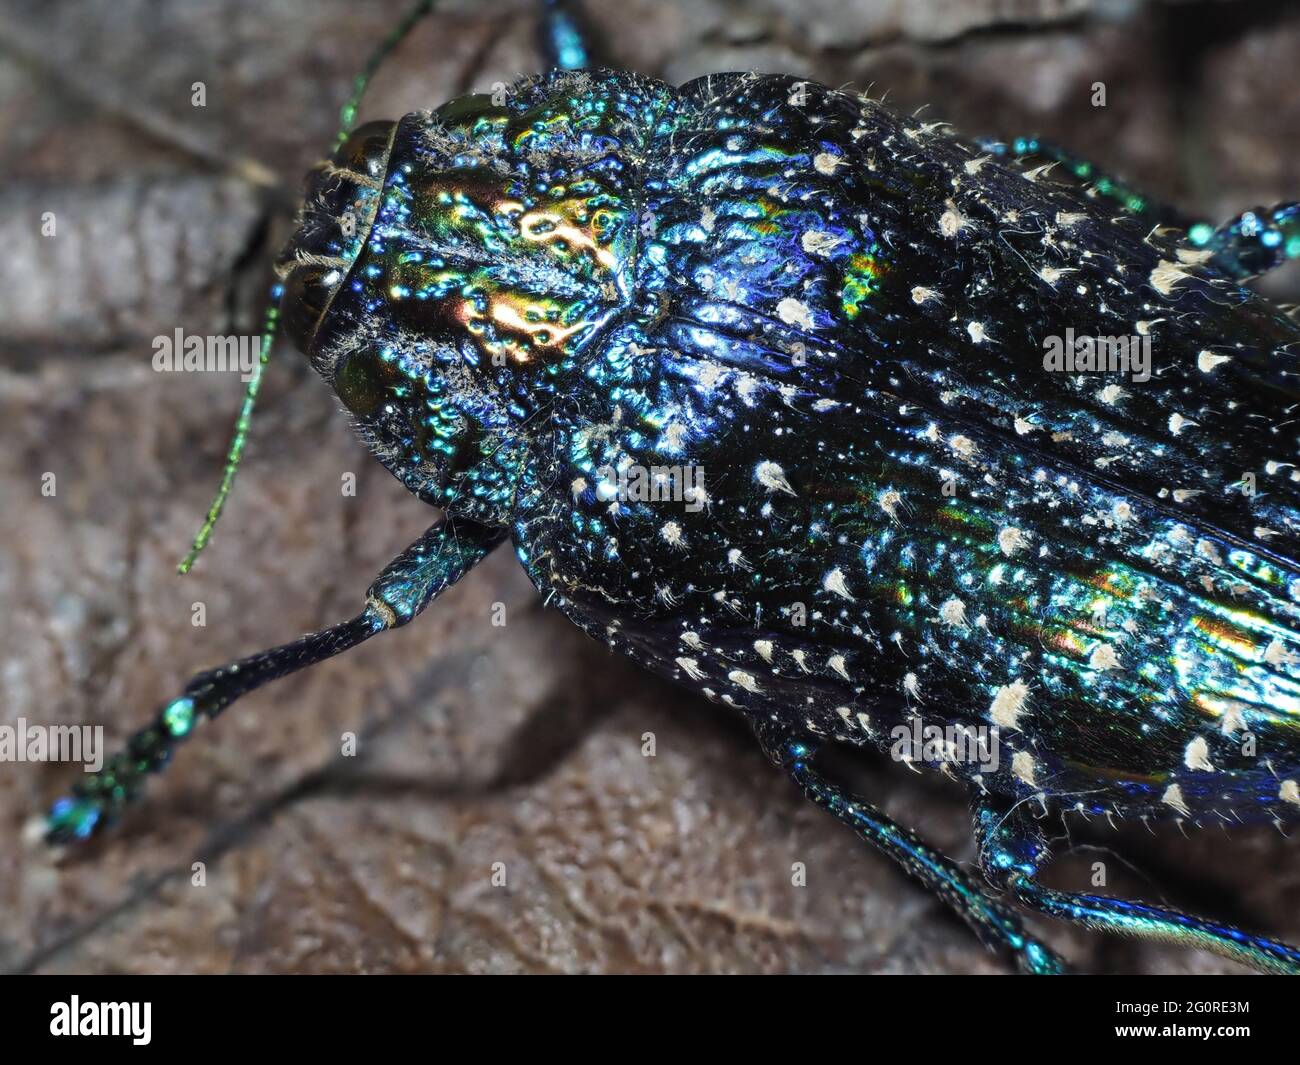 Beetle, (Polybothris sumptuosa), Blue, MADAGASCAR, Stacked Focus, set specimen, close up showing body and wing case, light with flash Stock Photo